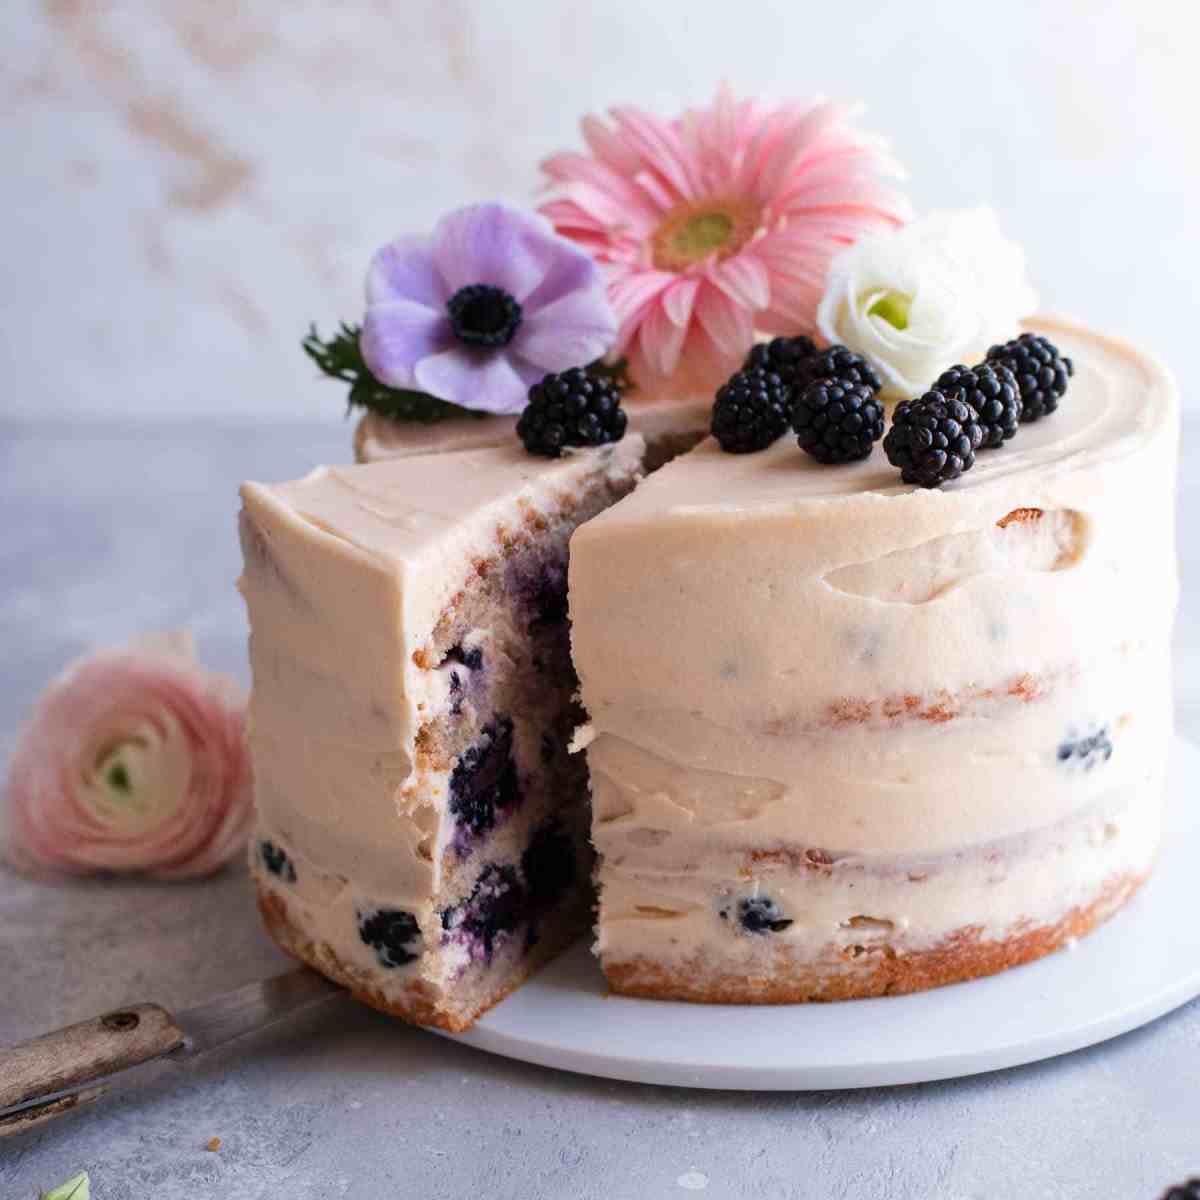 Blackberry cake with flower decoration on a serving plate that has a slice taken out